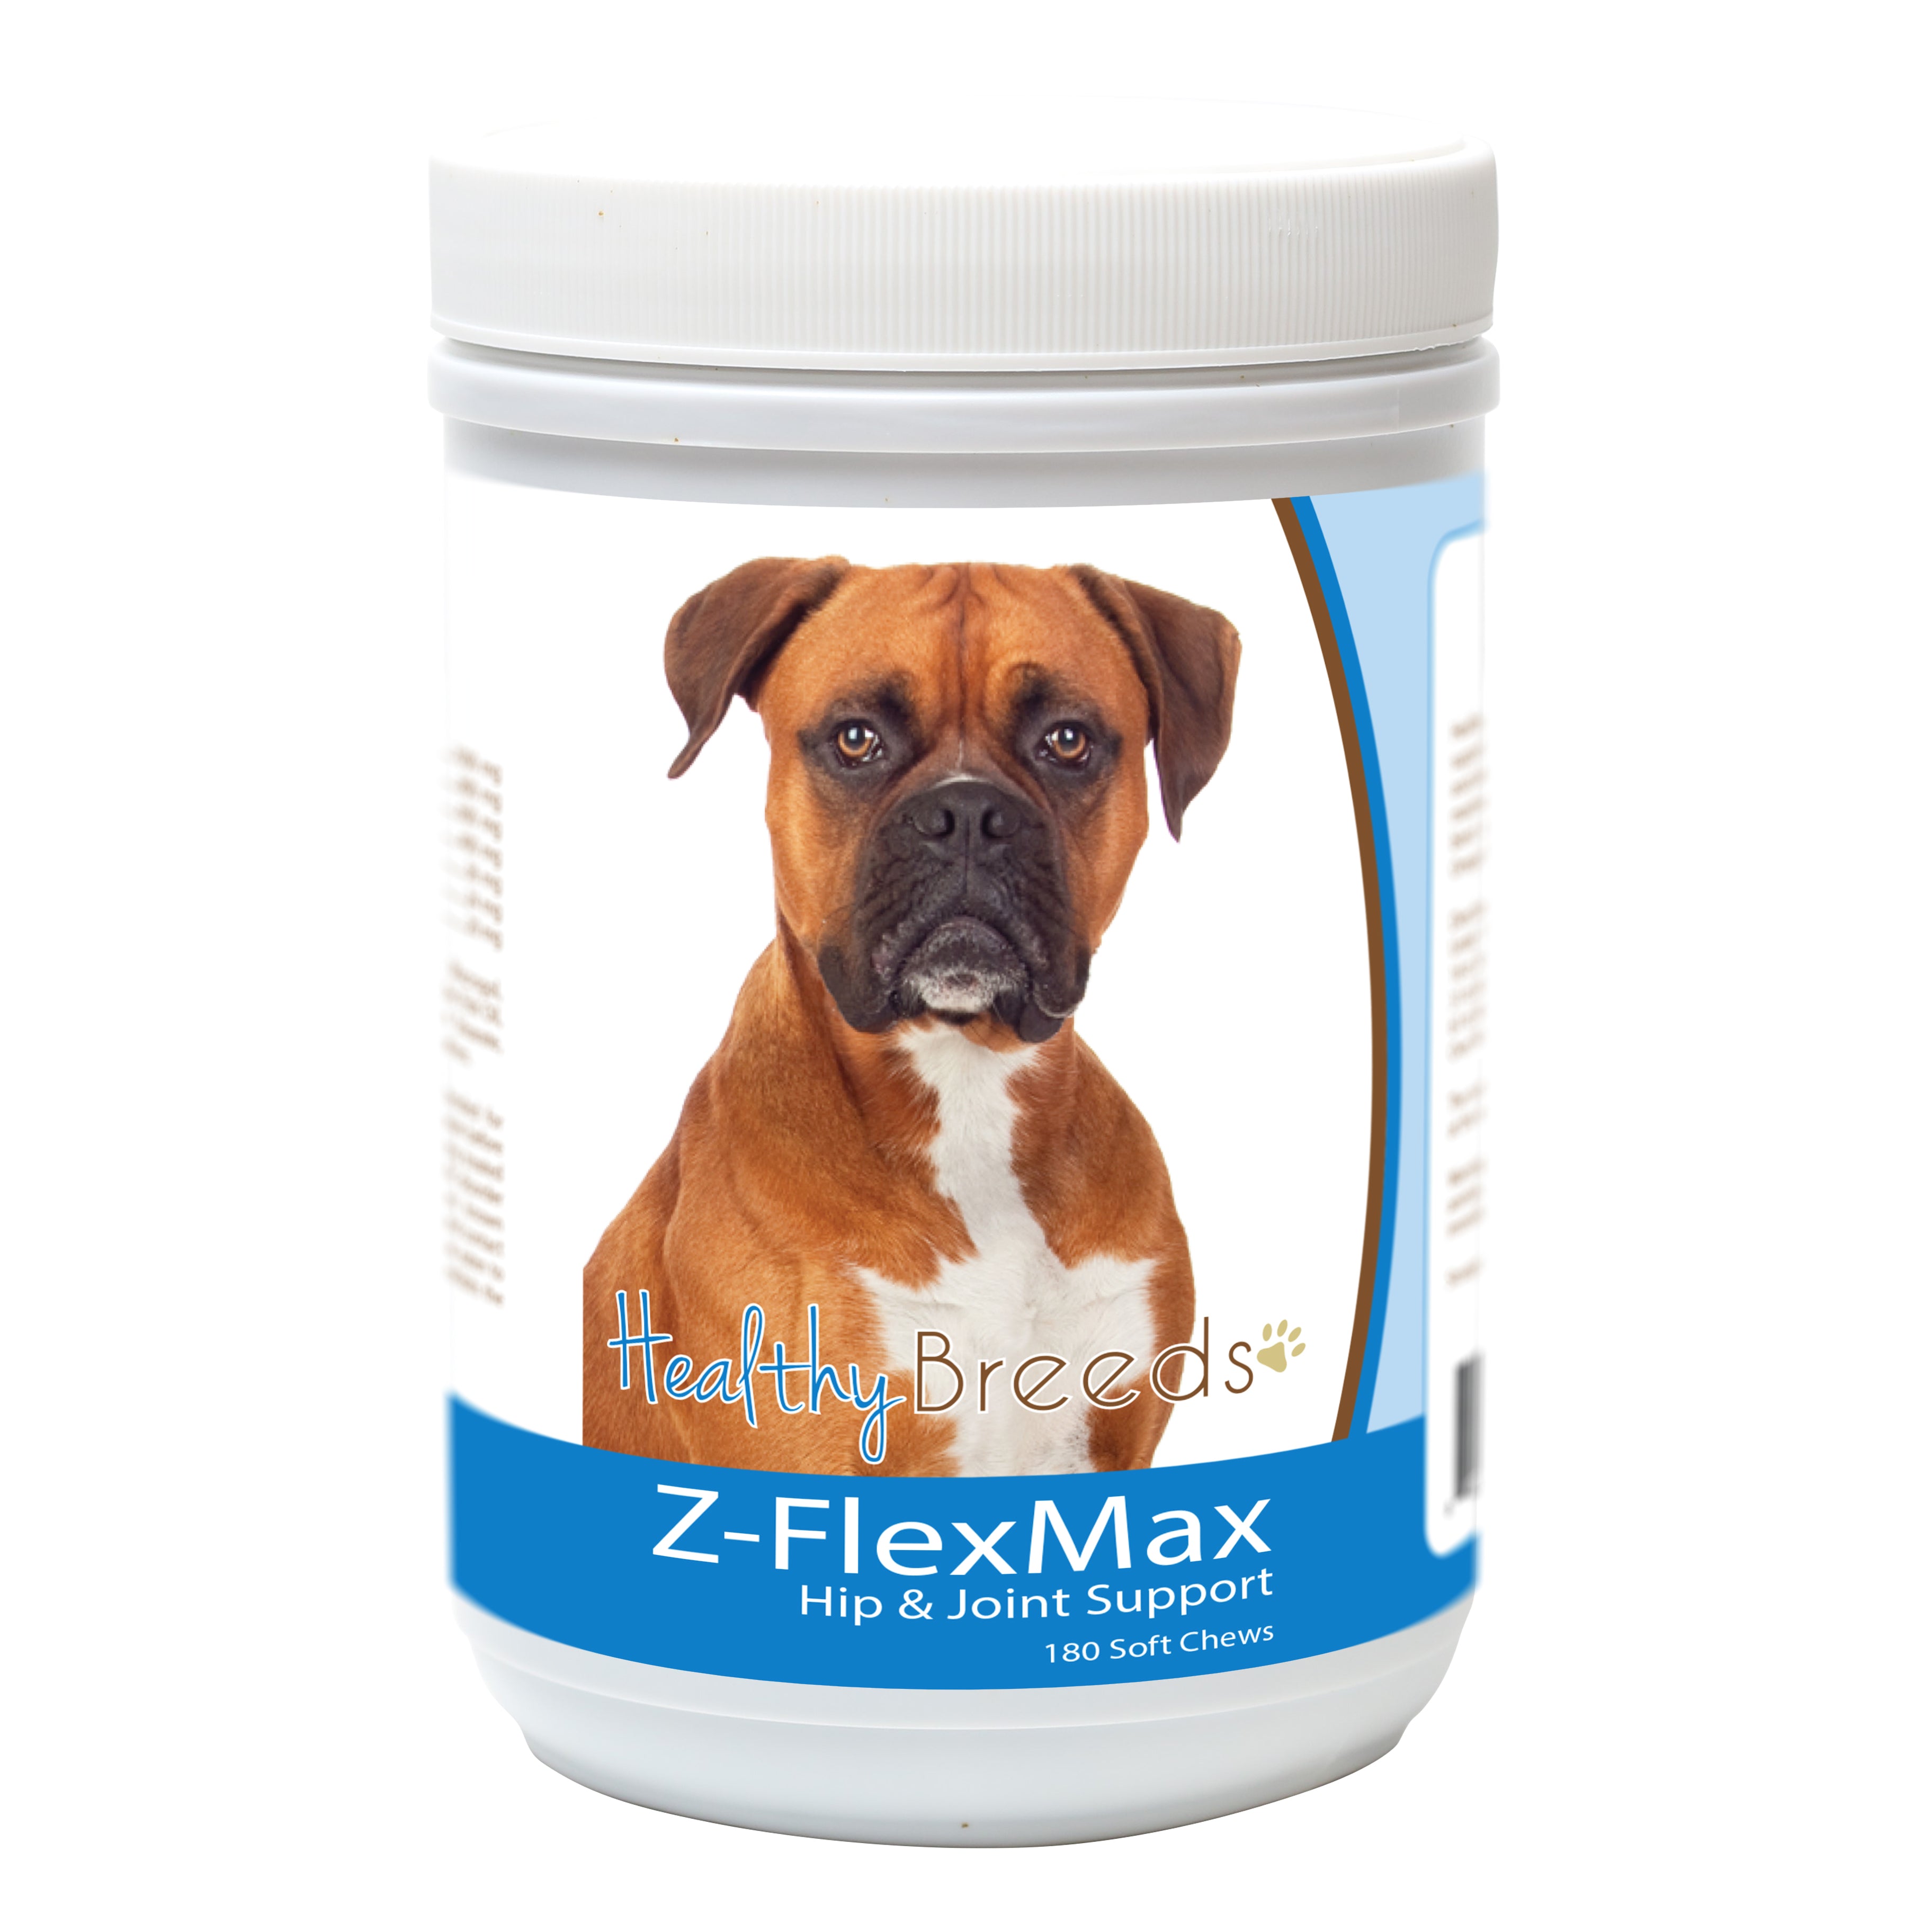 Boxer Z-Flex Max Dog Hip and Joint Support 180 Count